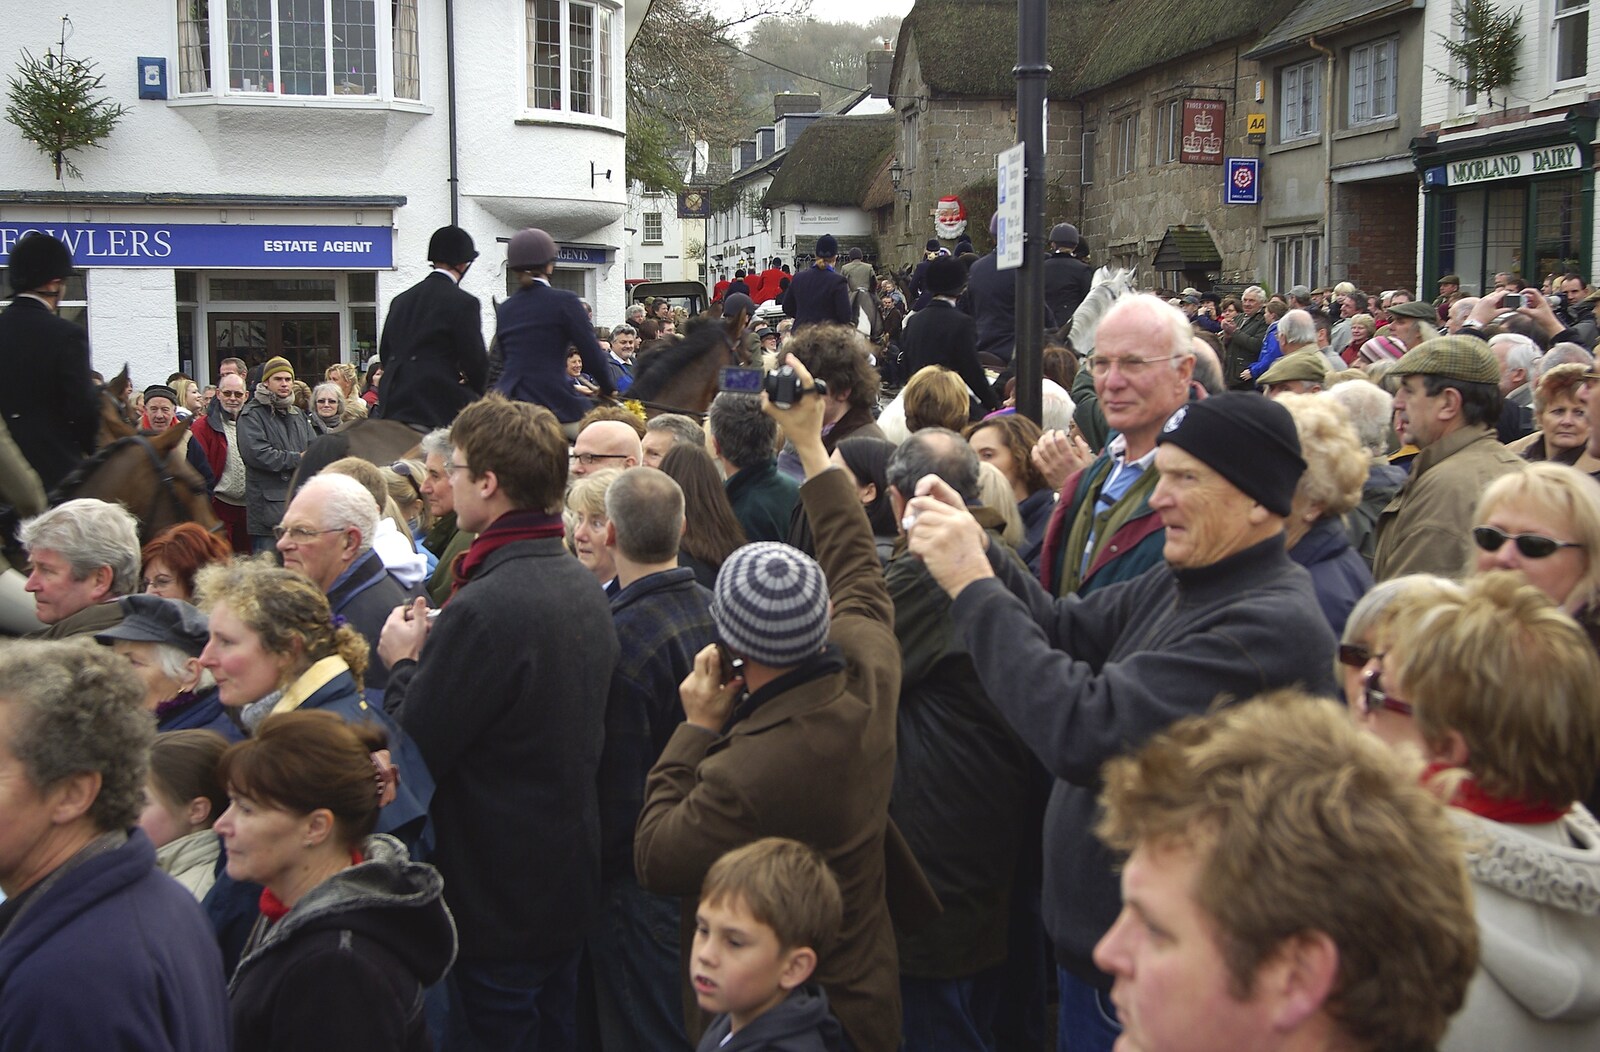 The hunt disappears up Mill Street from A Boxing Day Hunt, Chagford, Devon - 26th December 2007